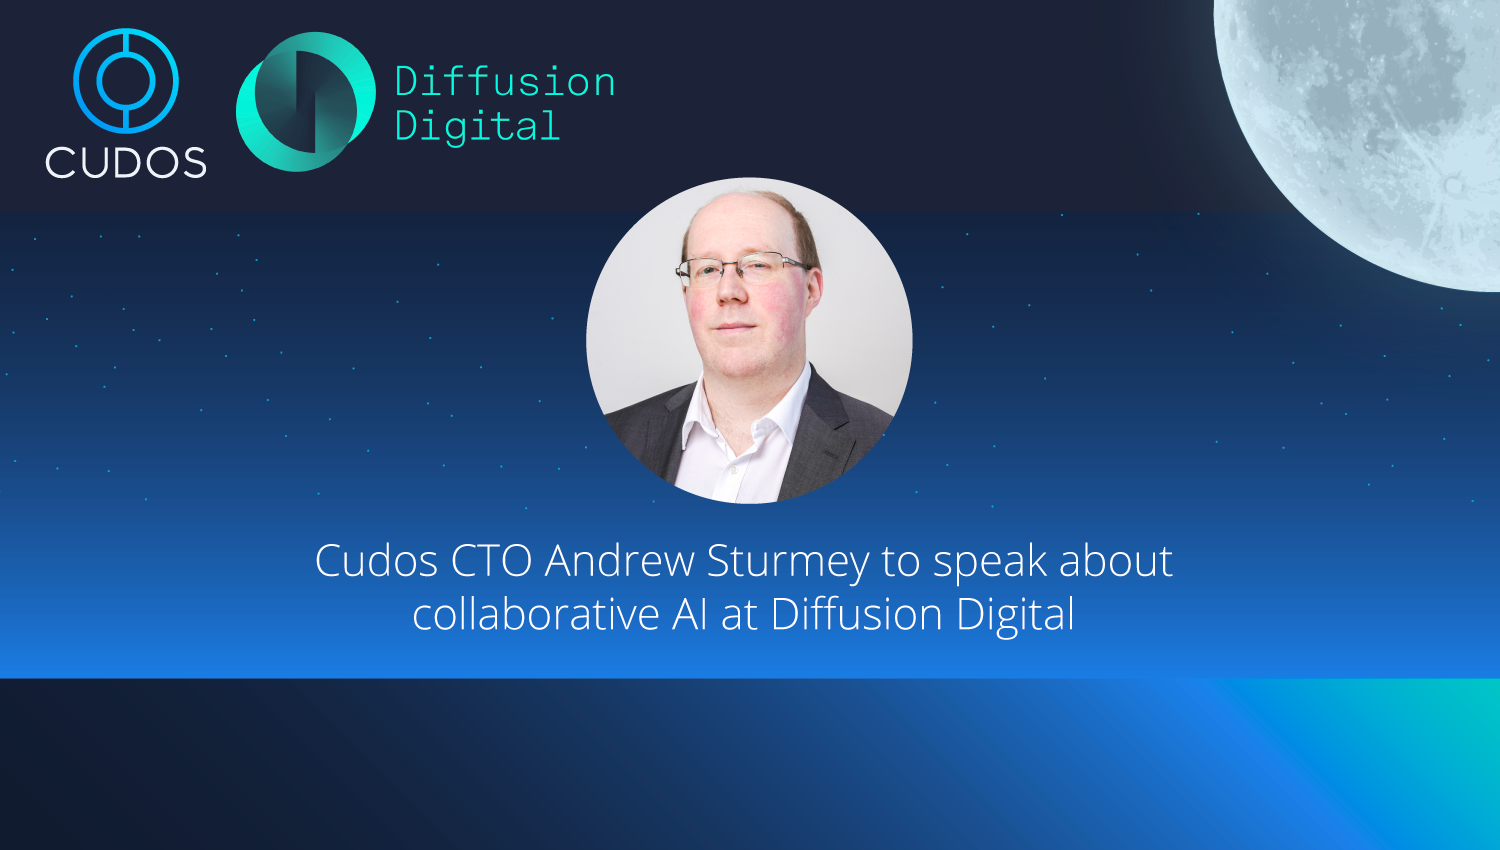 Cudos CTO Andrew Sturmey to speak about collaborative AI at Diffusion Digital